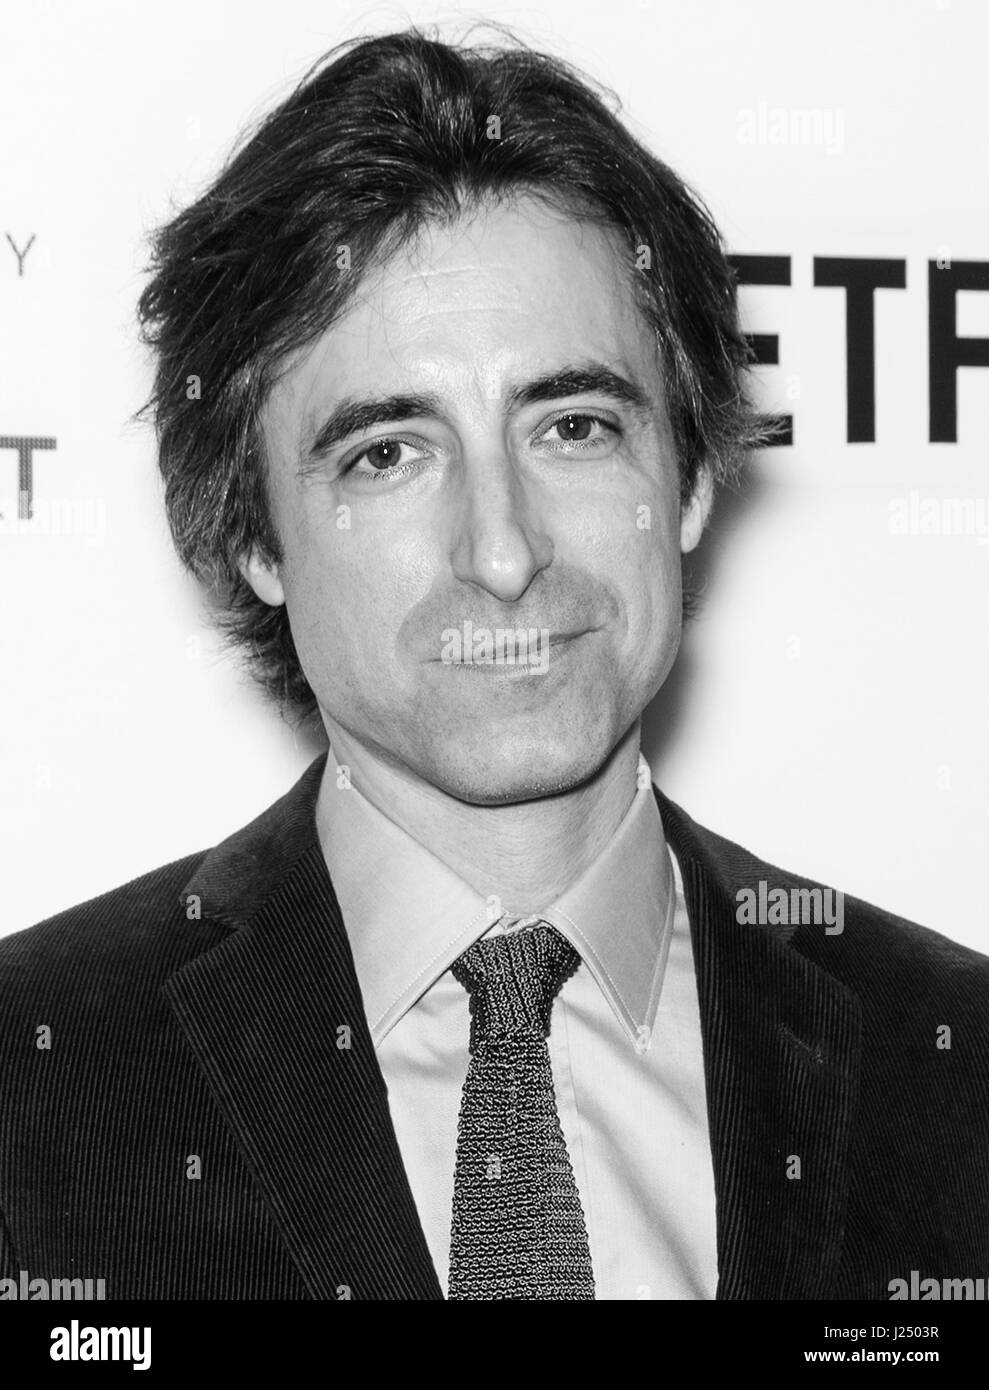 NEW YORK, NY - APRIL 24, 2017: Noah Baumbach attends Tribeca Talks Director's Series with Noah Baumbach during the 2017 Tribeca Film Festival at BMCC  Stock Photo